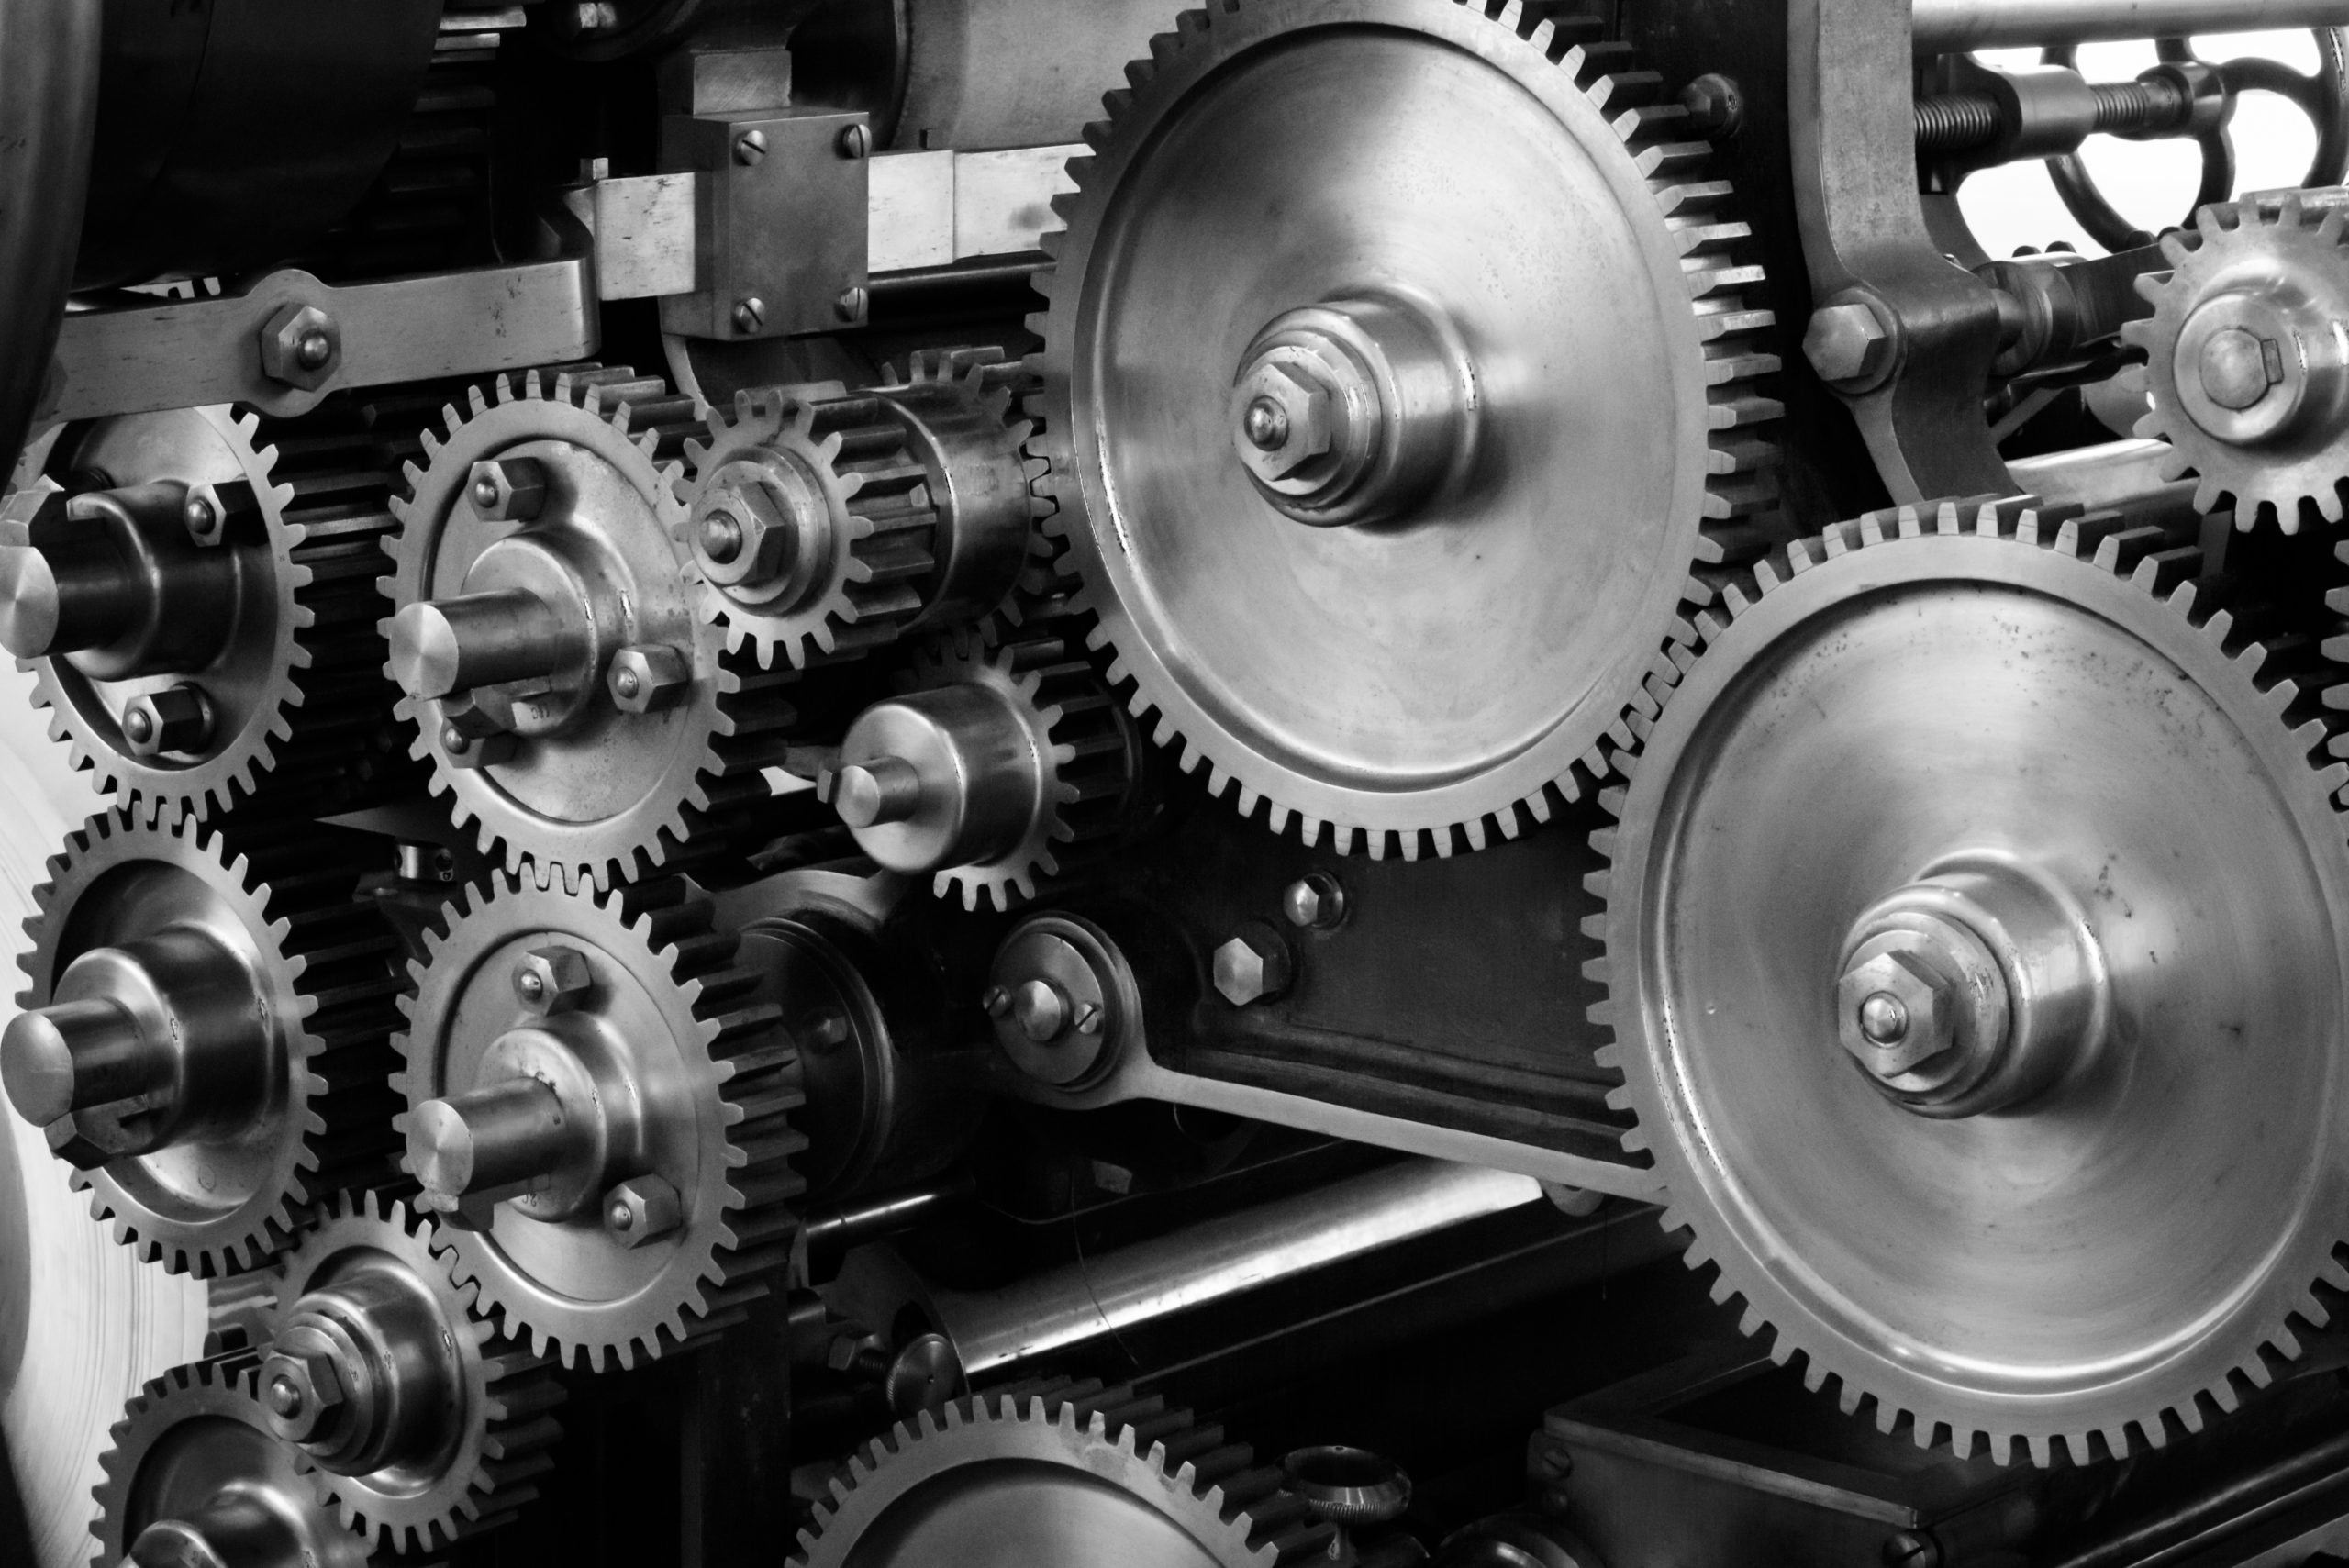 A picture showing several gears connected by machinery much like the way networks tools, be it hardware or software, a feature or process component, can be optimized using configuration management (CM).